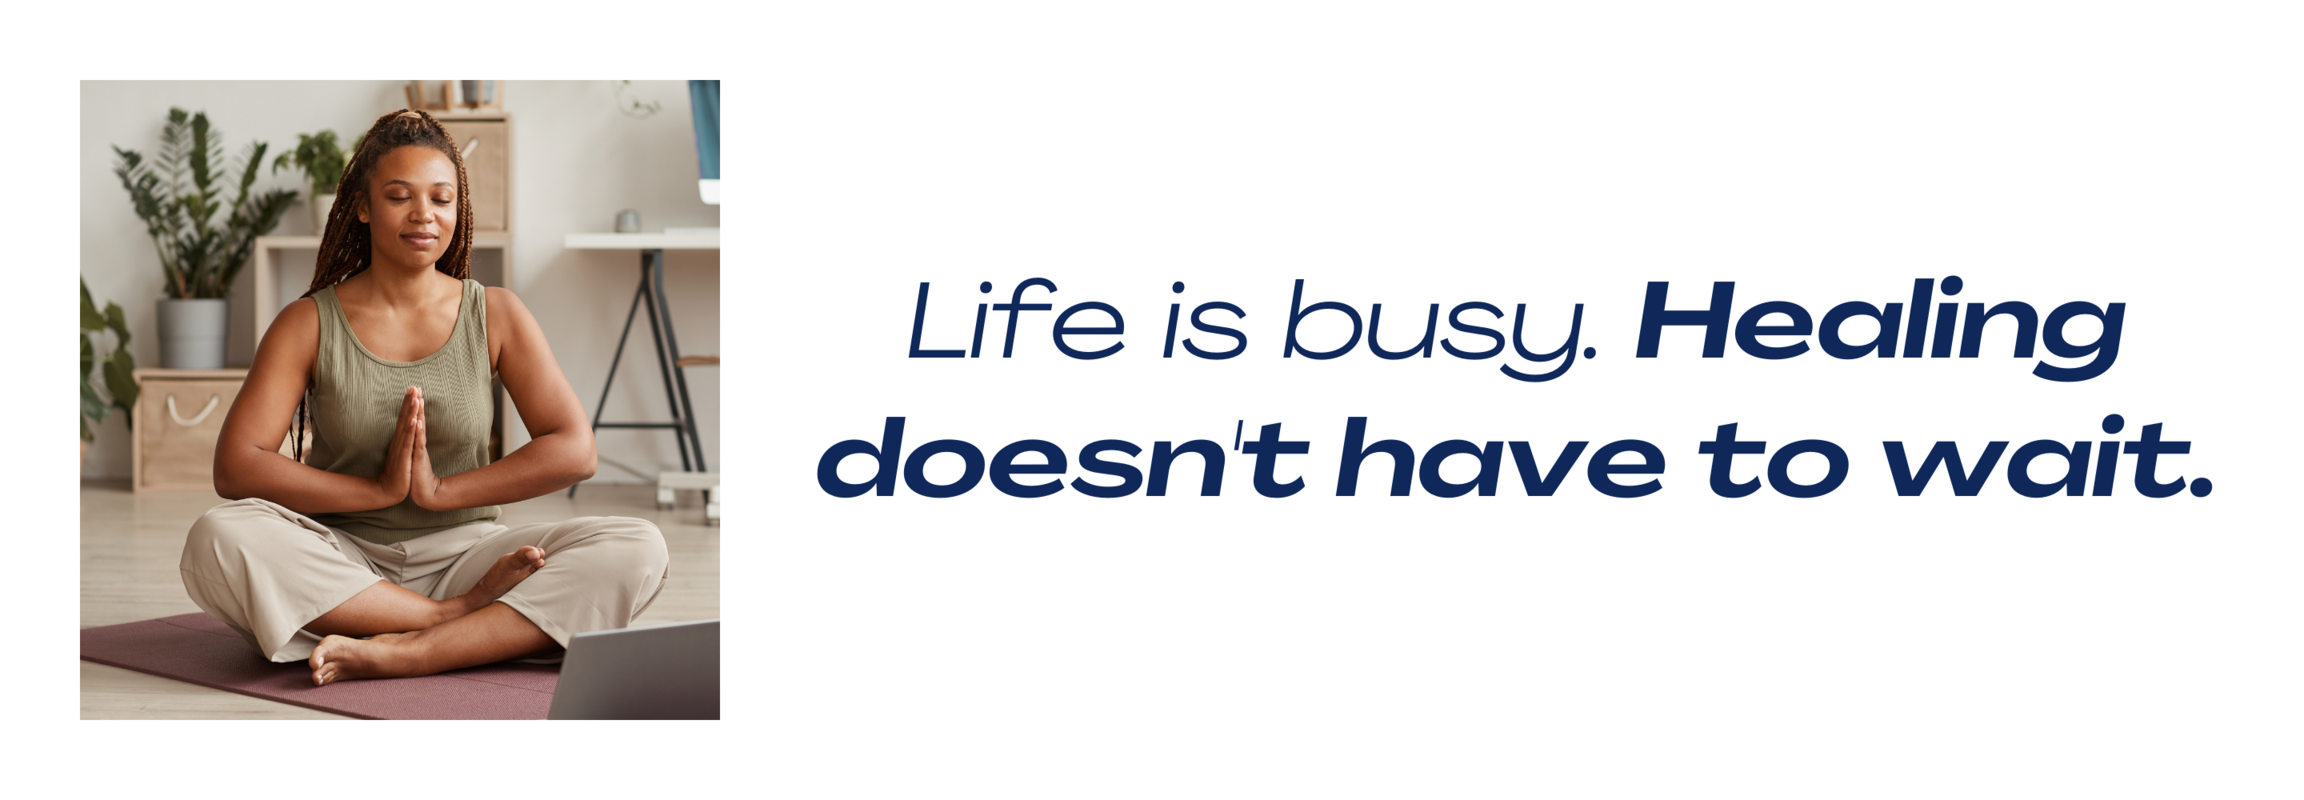 Life is busy. Healing doesn't have to wait.